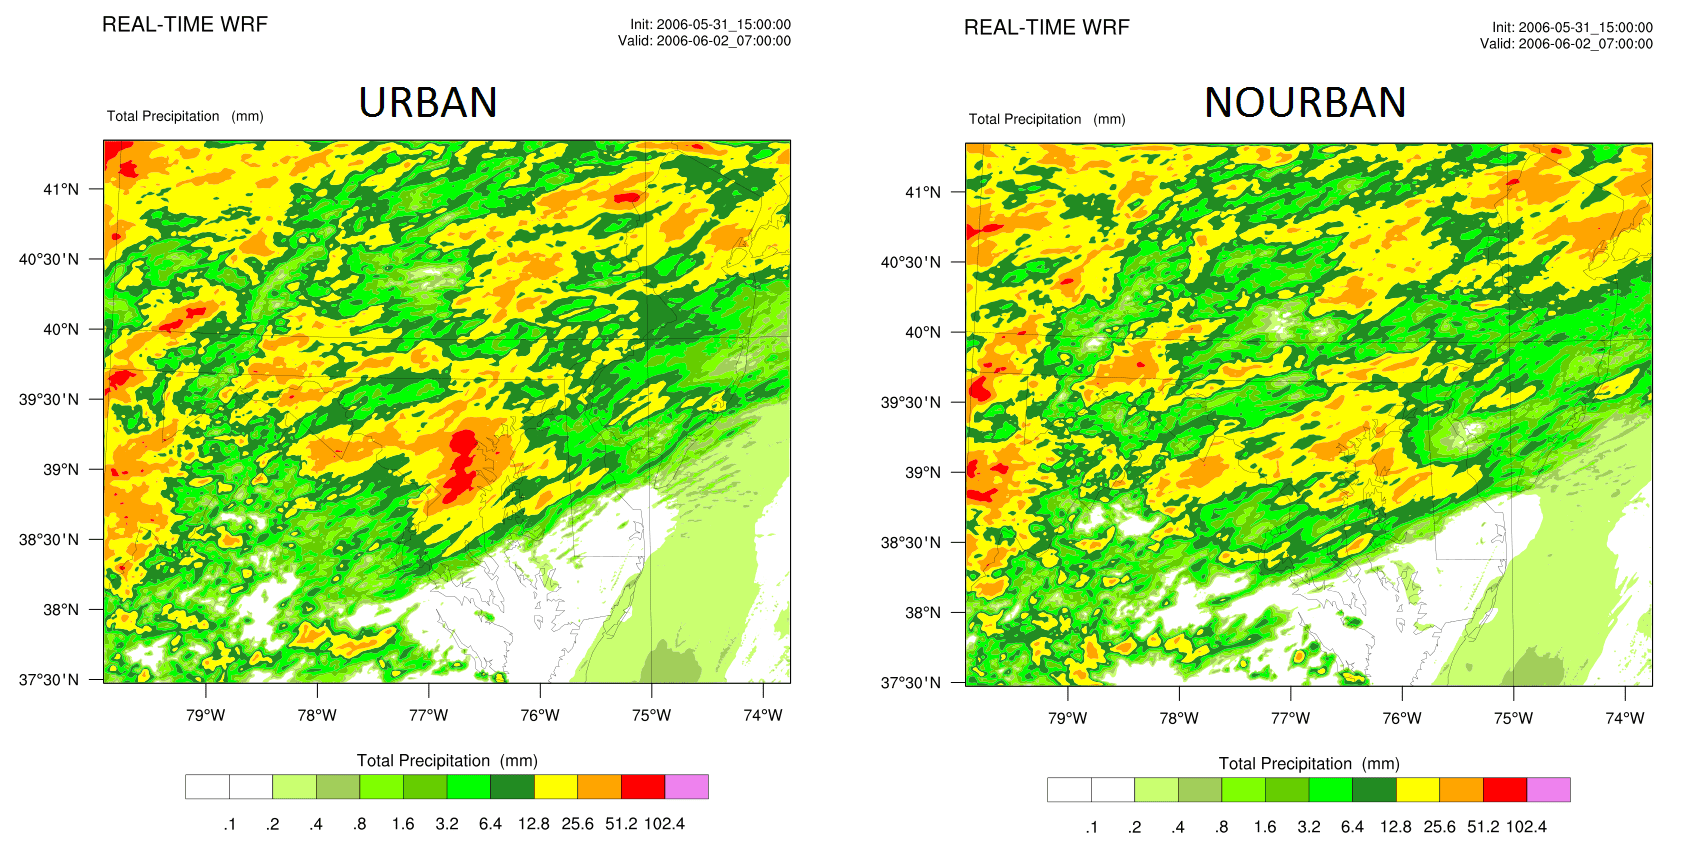 Figure 8 - Mesoscale model results illustrating how the convective precipitation field (in mm) varies with and without urban land cover in the WRF model simulation. Image Credit: Co-Author Andersen.